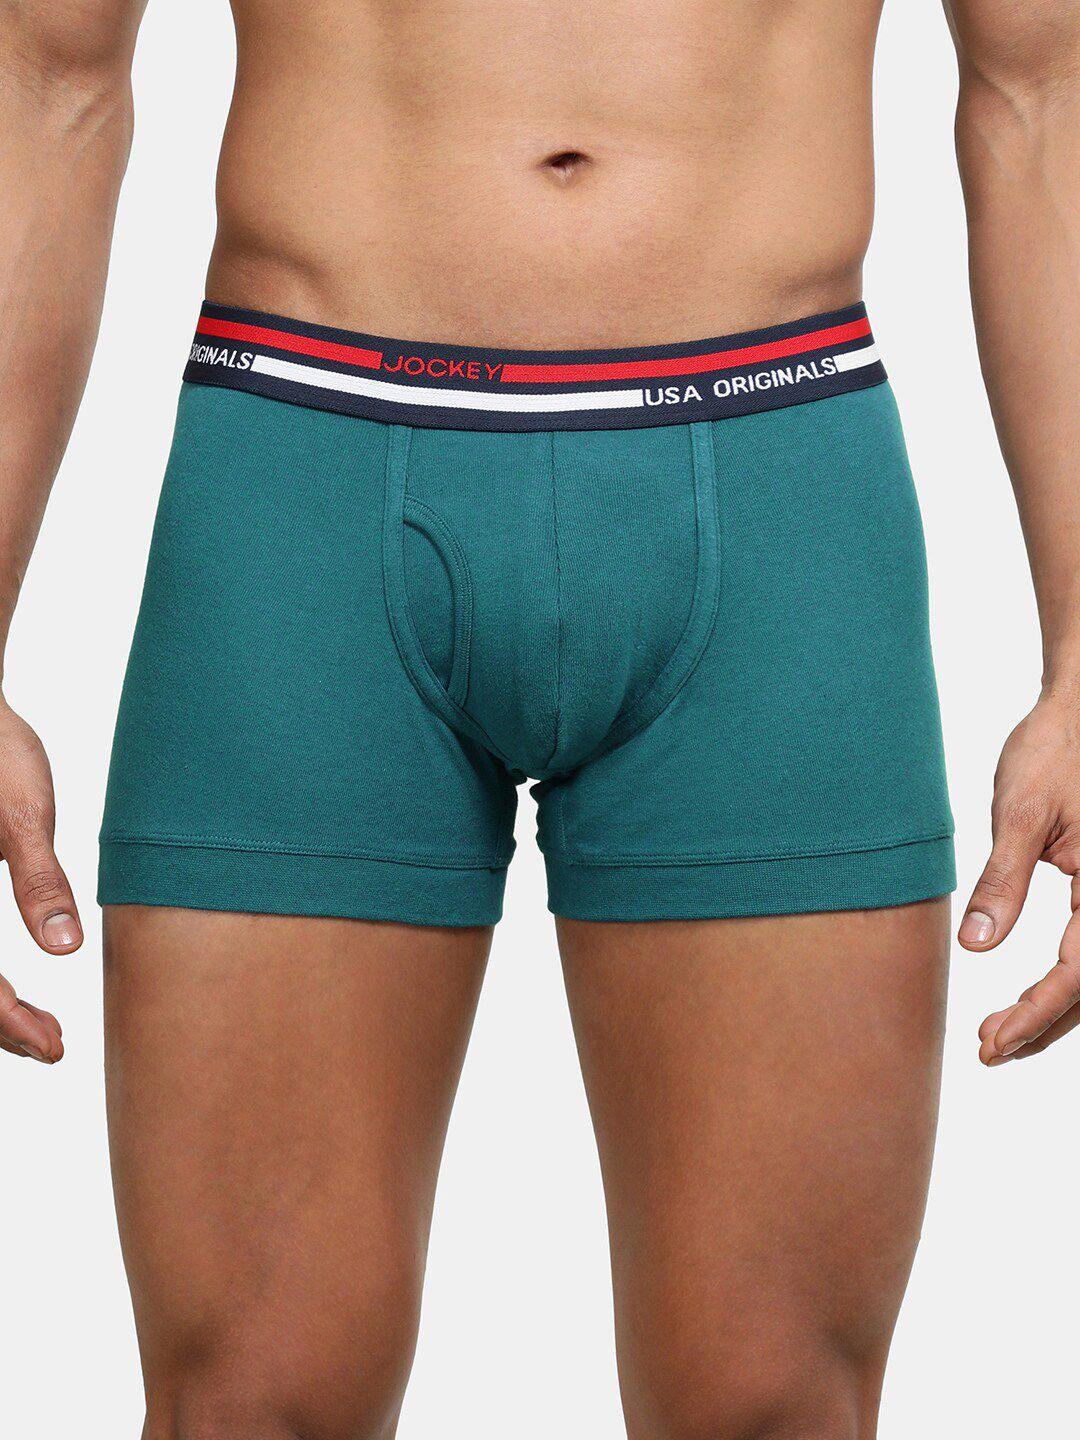 jockey men super combed cotton trunk with ultrasoft and durable waistband ui22-0105-seapt